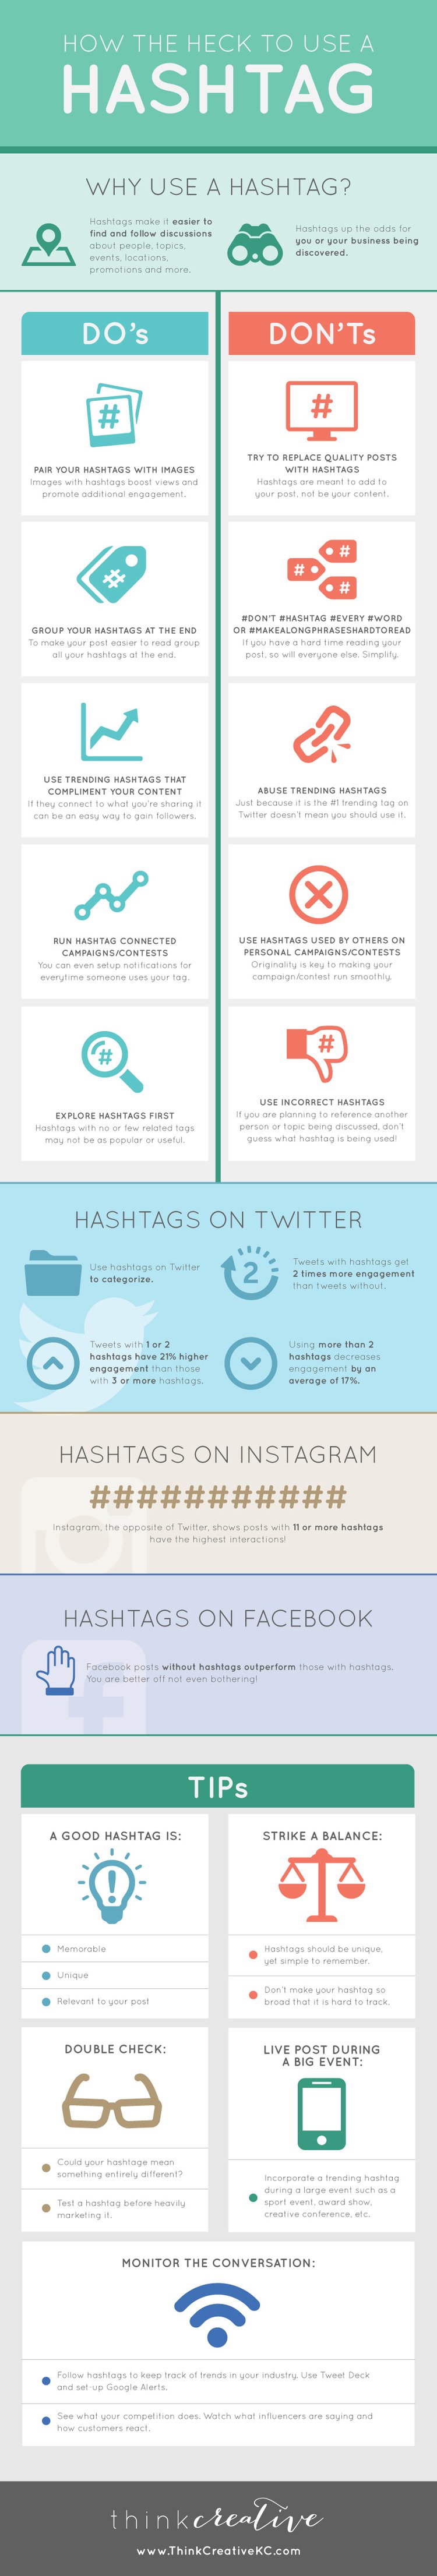 How+the+Heck+to+Use+a+Hashtag+#Infographic++-++Think+Creative